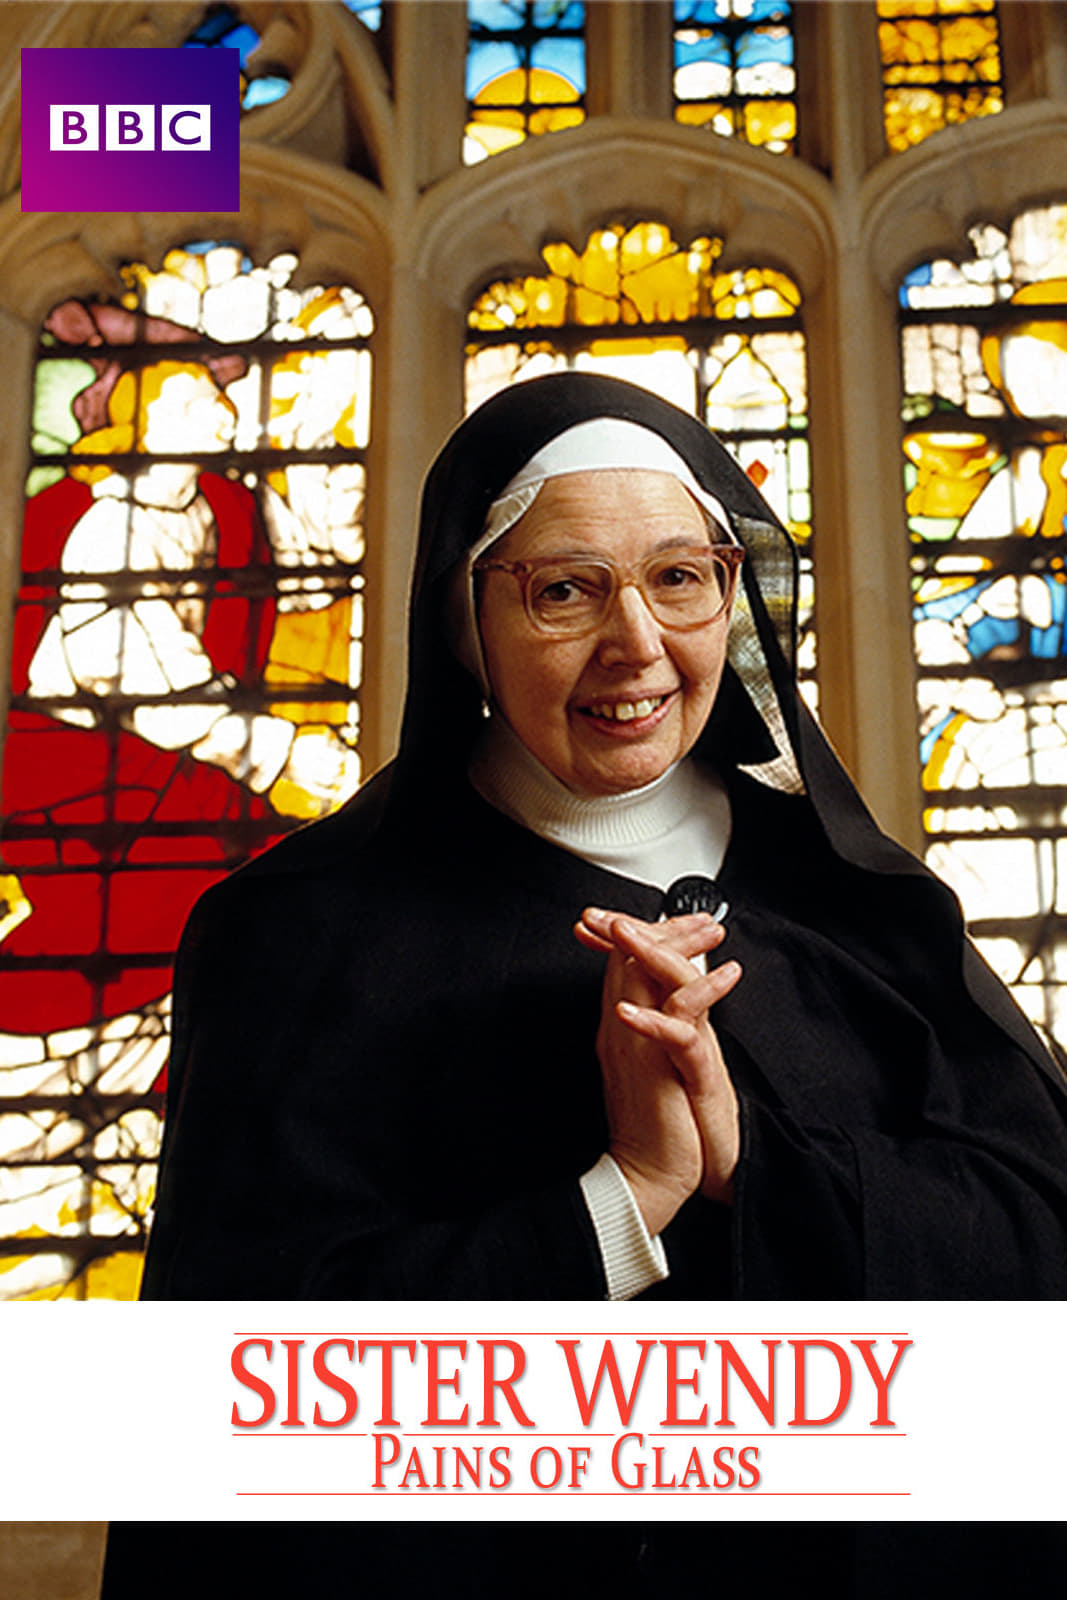 Sister Wendy's Pains of Glass